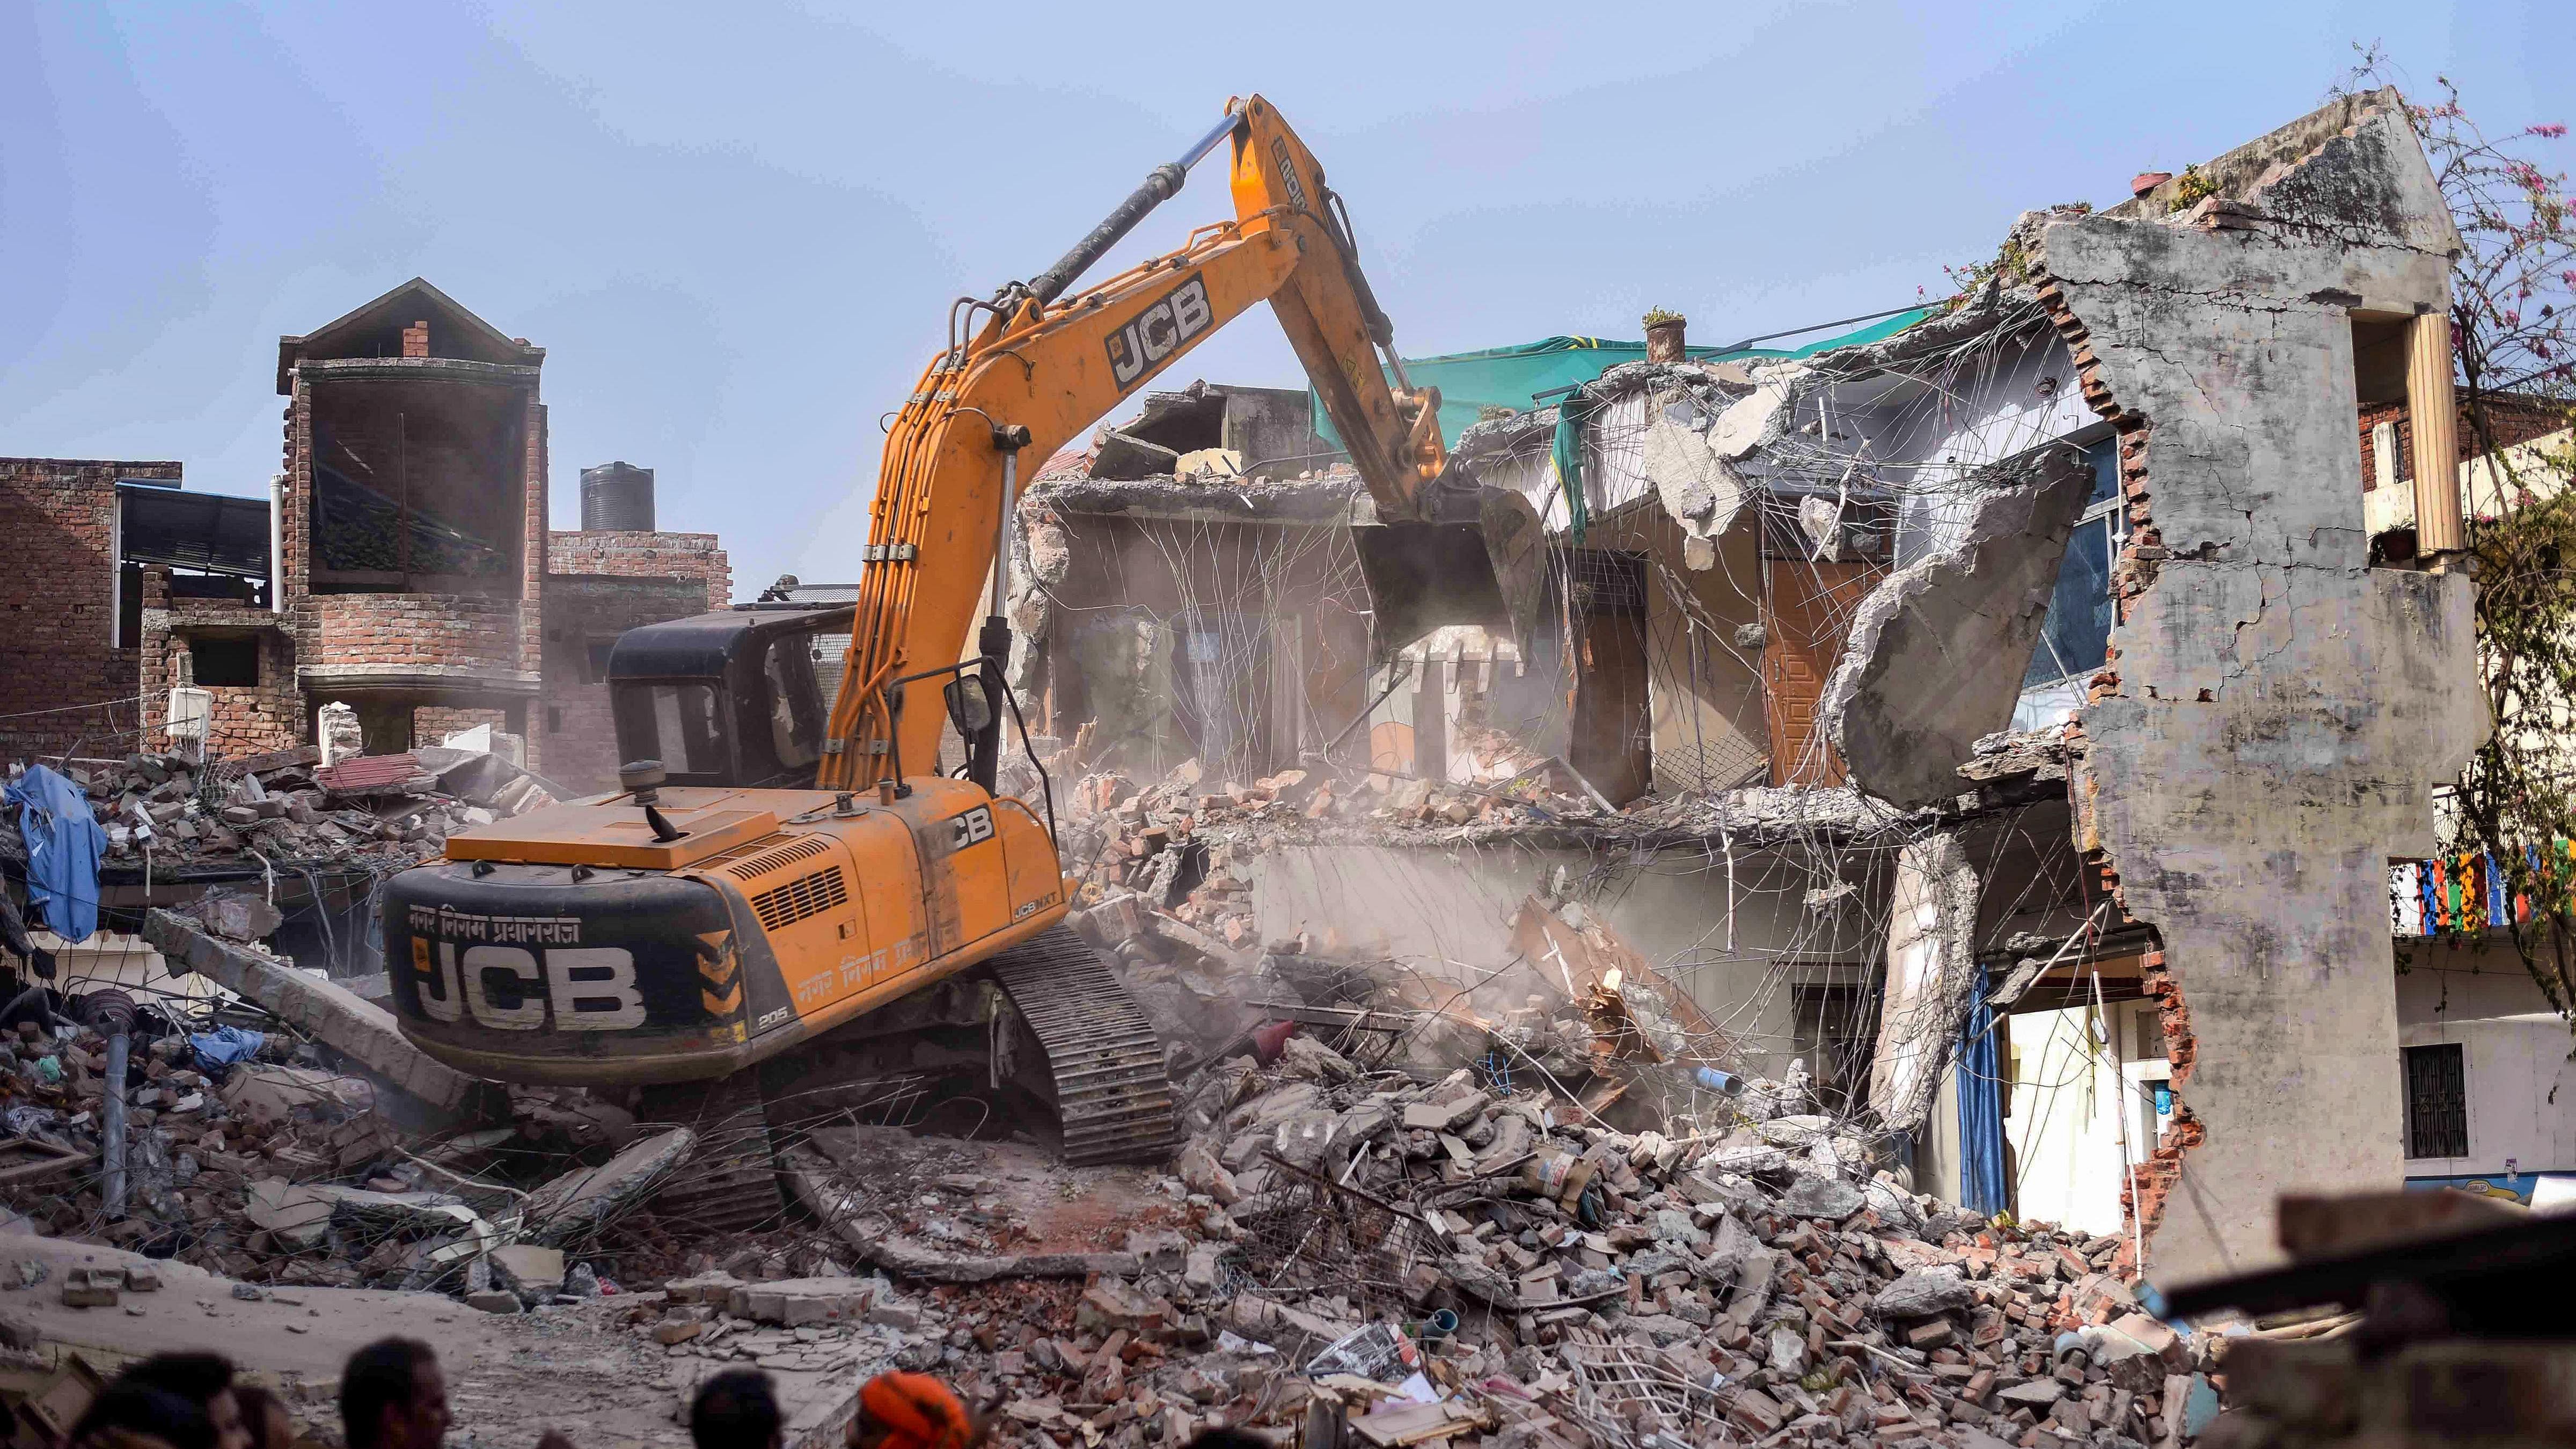 Adityanath’s second term saw bulldozers demolishing properties of alleged criminals and people involved in riots, earning the CM the sobriquet of “Baba Bulldozer”. Credit: PTI Photo